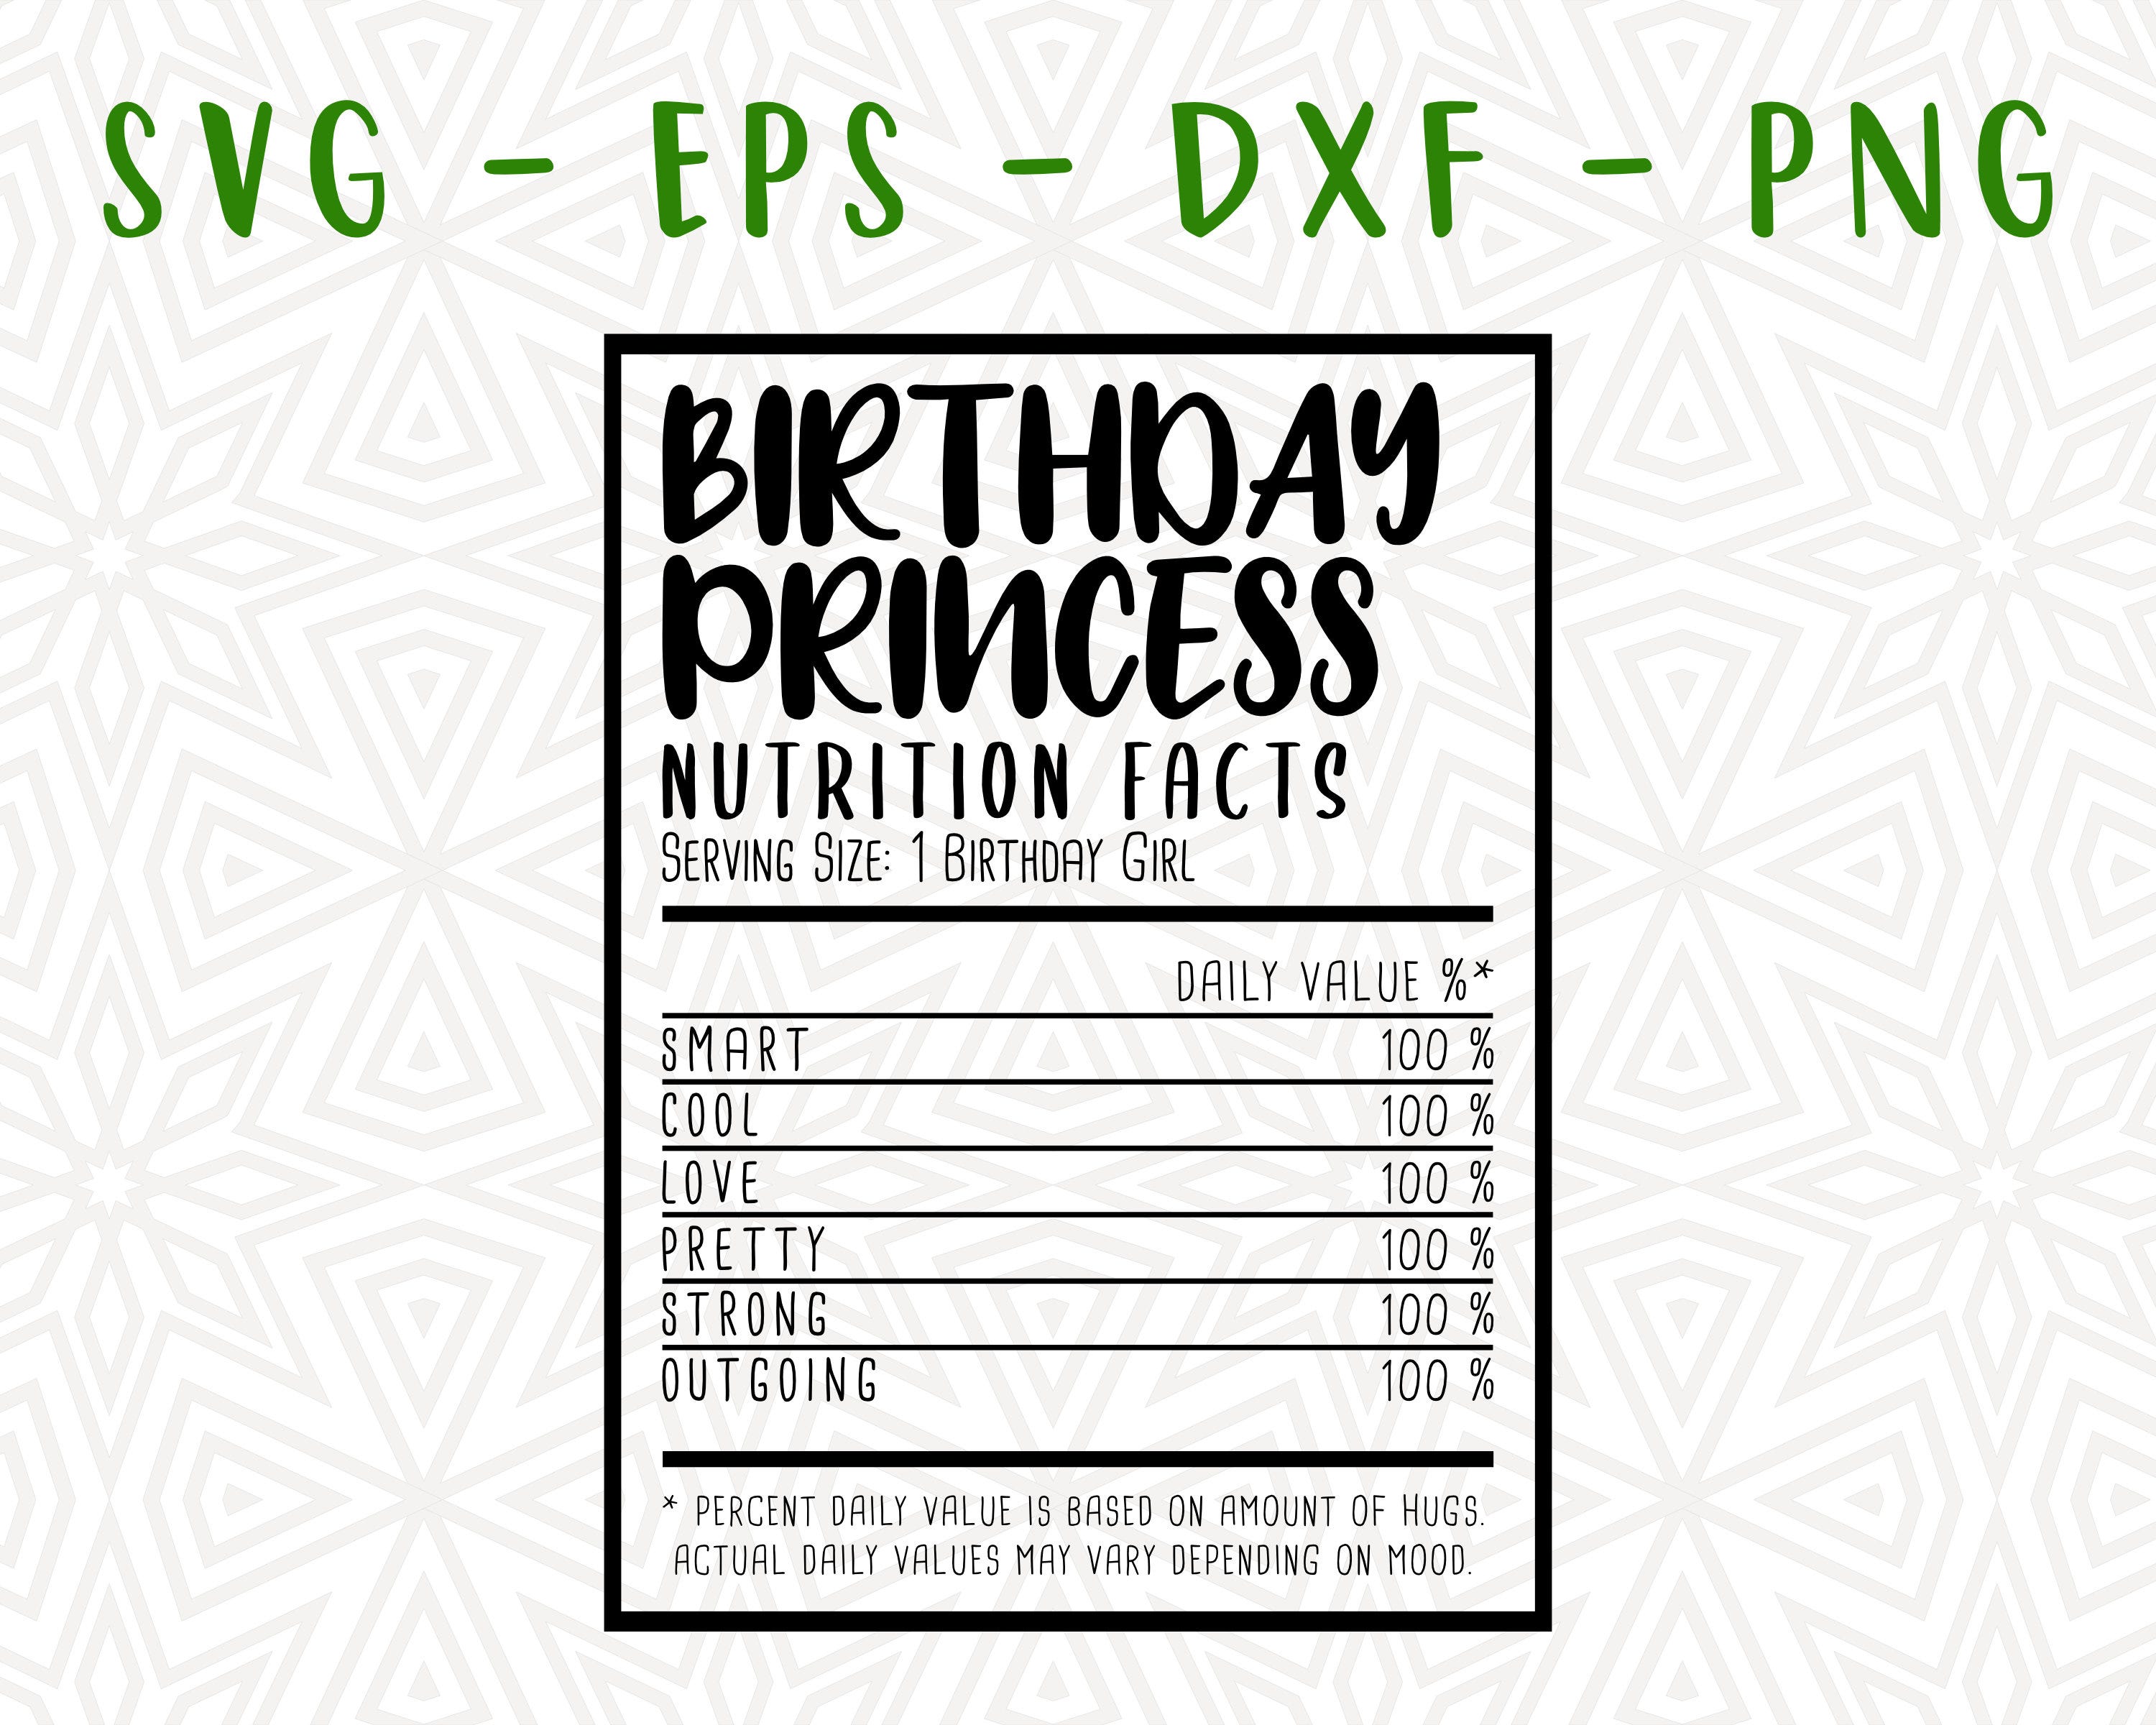 Birthday Girl Princess Queen Nutrition Facts SVG Girl SVG Sister Svg, Png, Eps, Dxf, Cricut, Cut Files, Silhouette Files, Download, Print